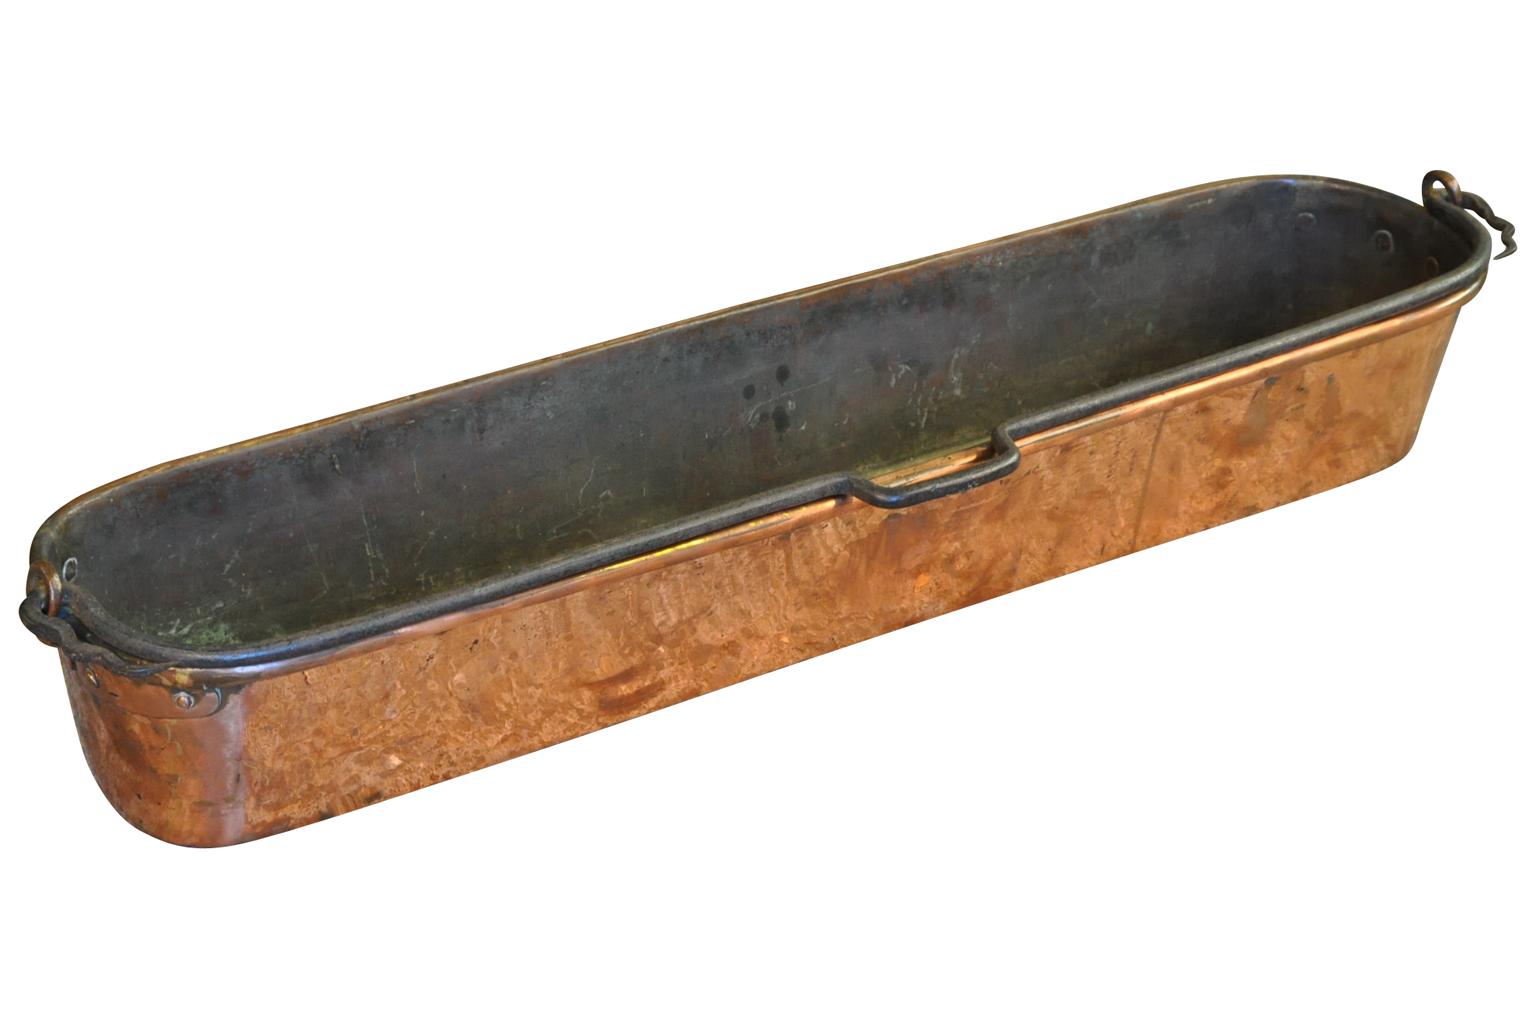 An exceptionally large 18th century fish pan in copper from the South of France. A perfect farm table center piece.